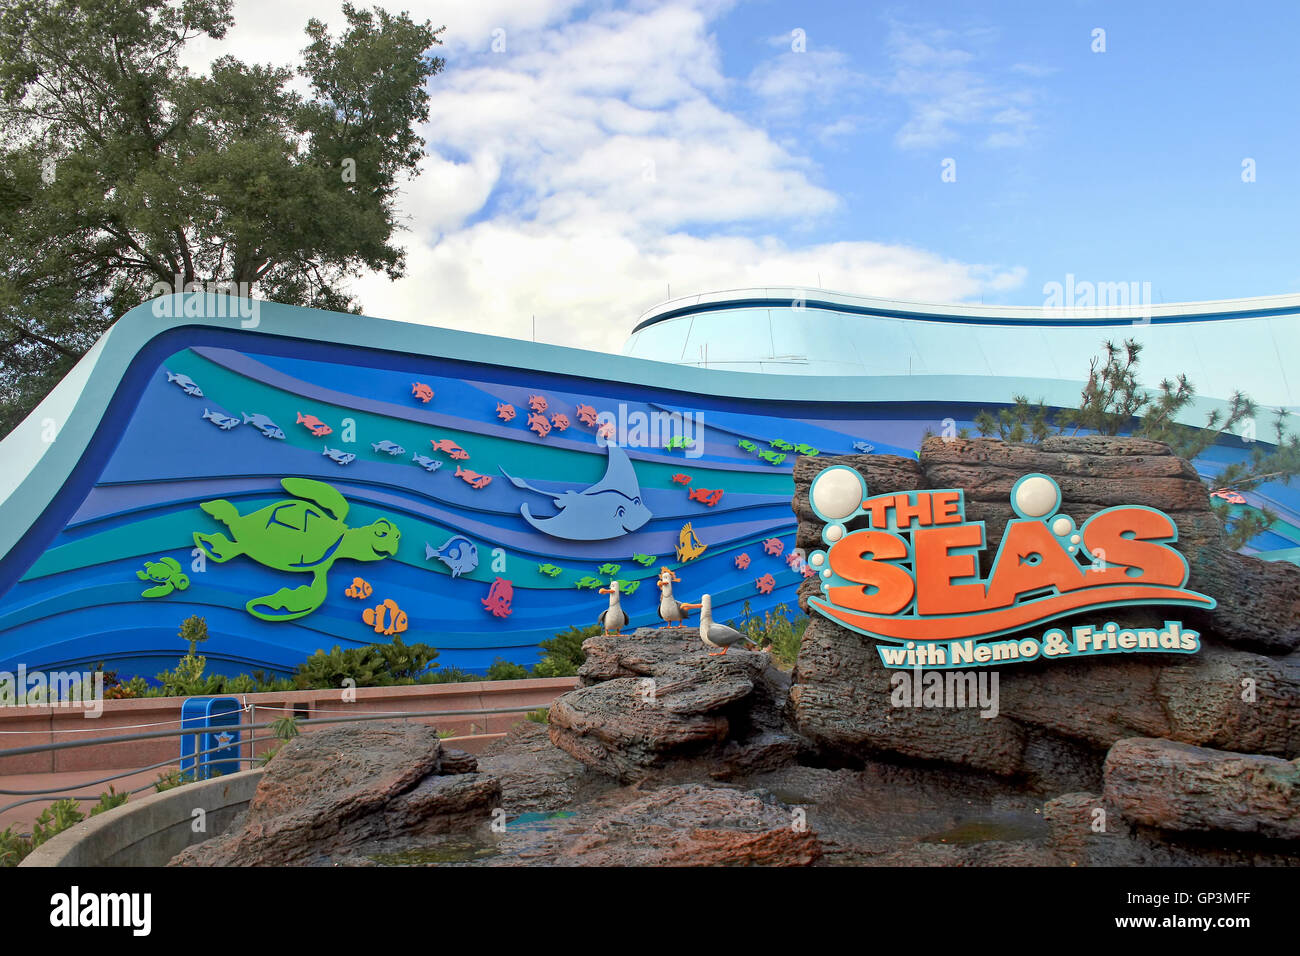 Orlando, Florida. January 12th, 2007. The front of The Seas with Nemo and Friends in Epcot, Walt Disney World. Stock Photo